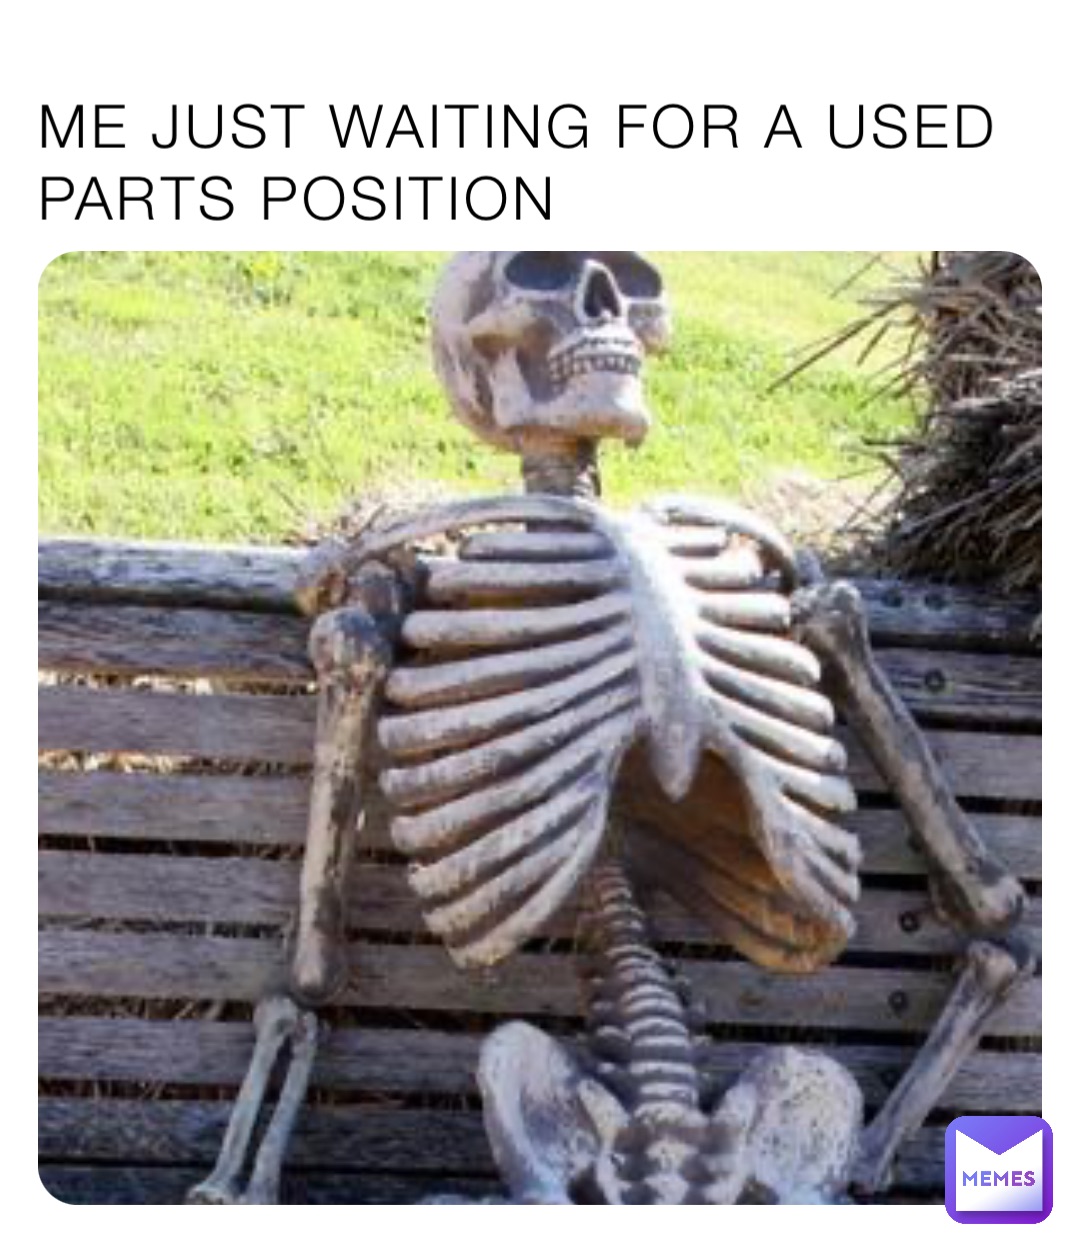 ME JUST WAITING FOR A USED PARTS POSITION | @626jyhsgft | Memes